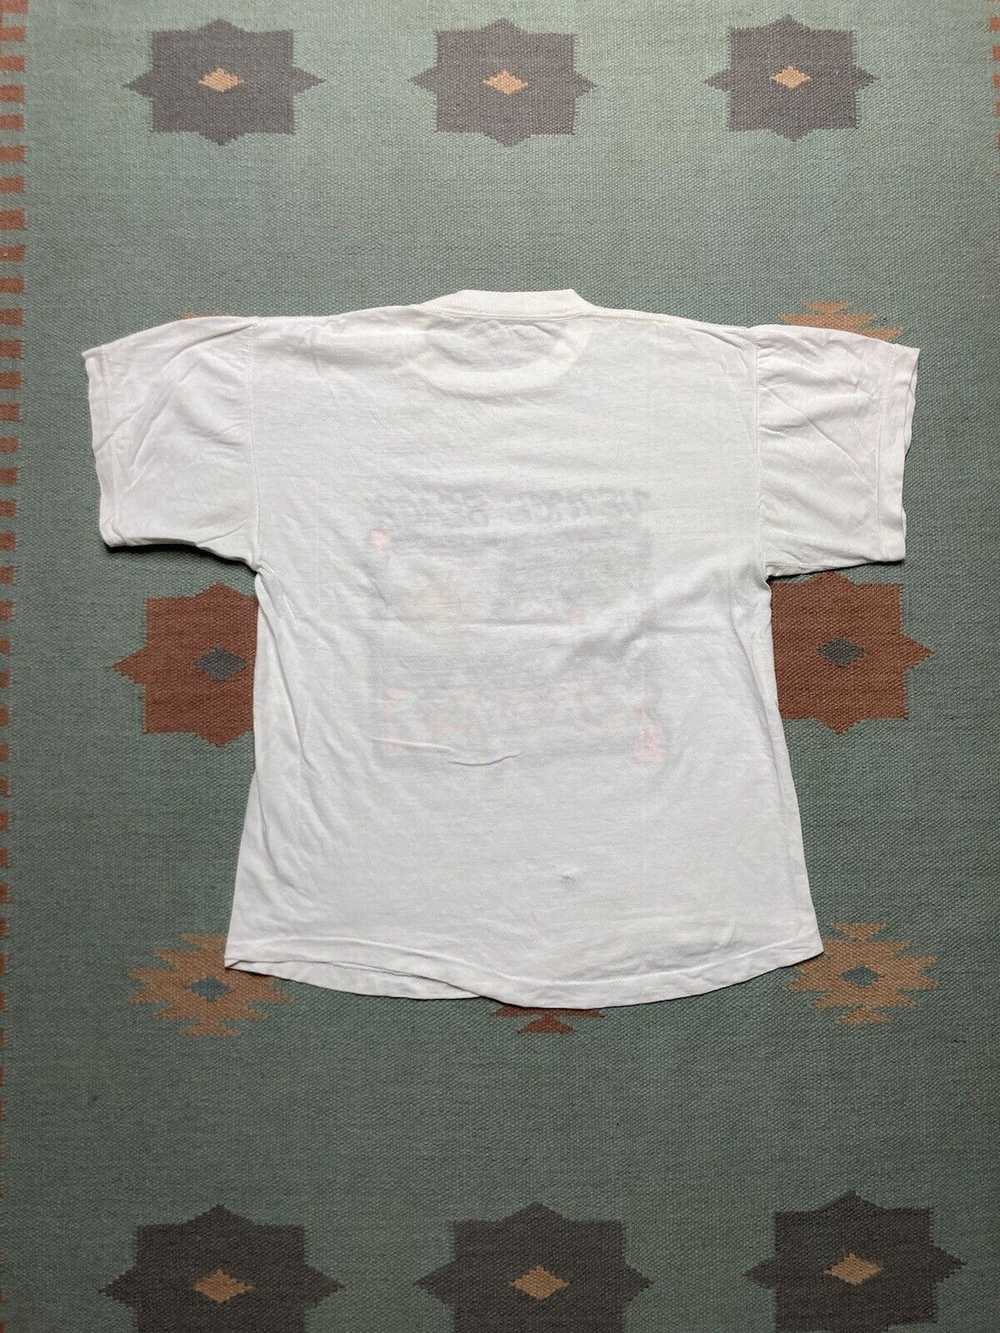 Made In Usa × Peanuts × Vintage VTG 80s t shirt s… - image 6